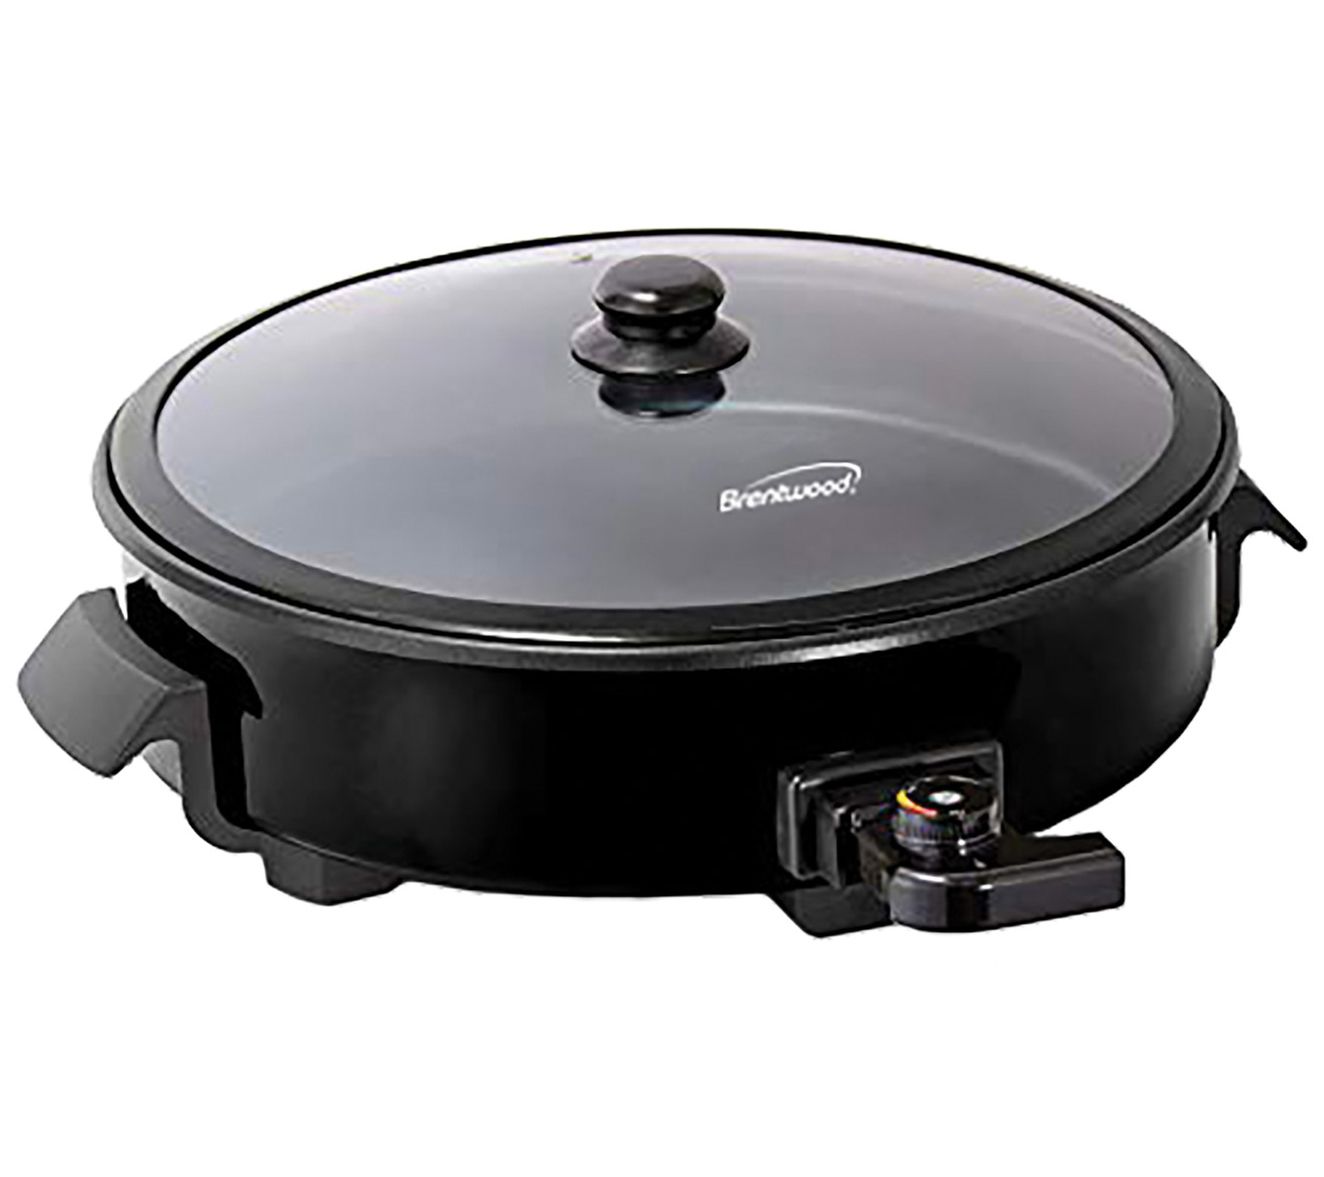 Brentwood Select 8 in. Non-Stick Electric Skillet with Glass Lid at Tractor  Supply Co.